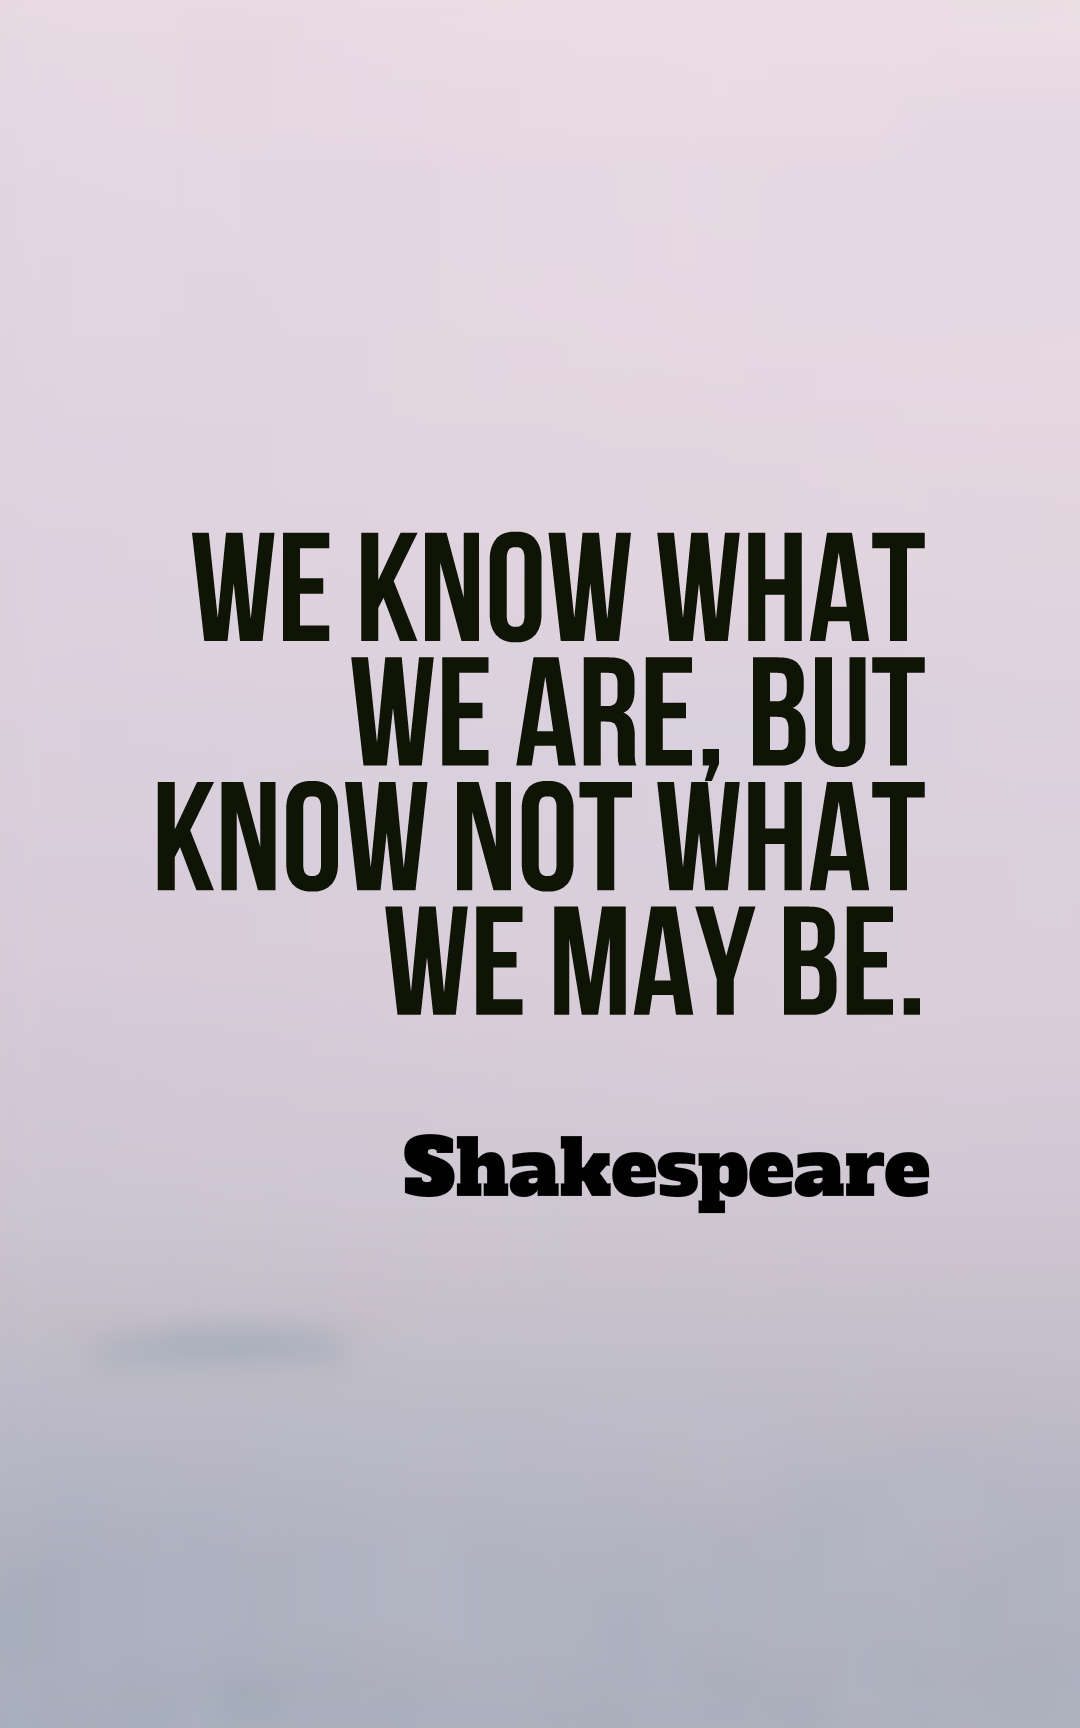 We know what we are, but know not what we may be.